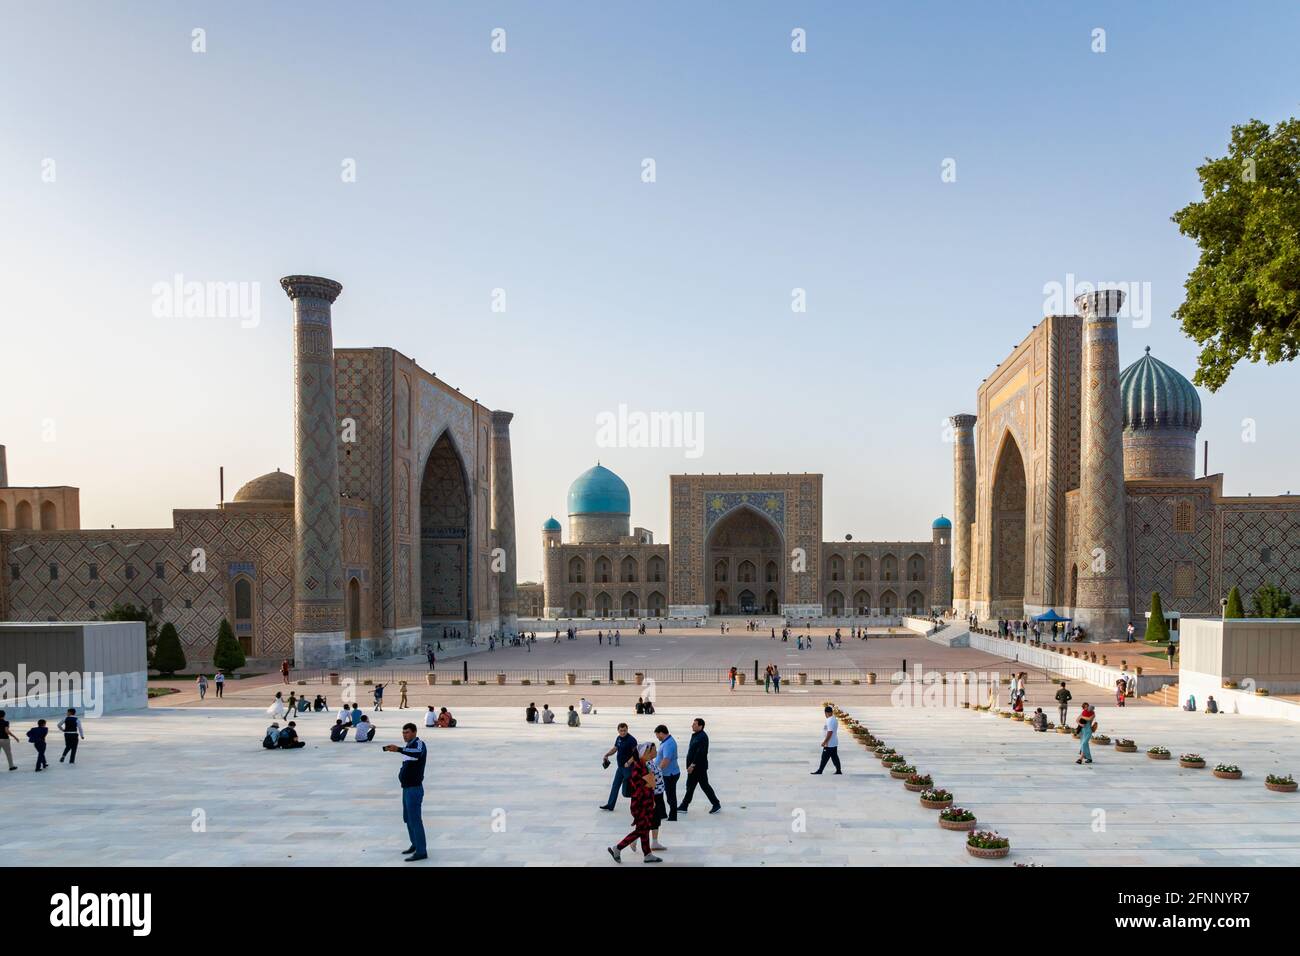 The Registan square architecture in Samarkand, Uzbekistan. Registan is famous for its beautiful architecture and colorful mosaic decoration. Stock Photo